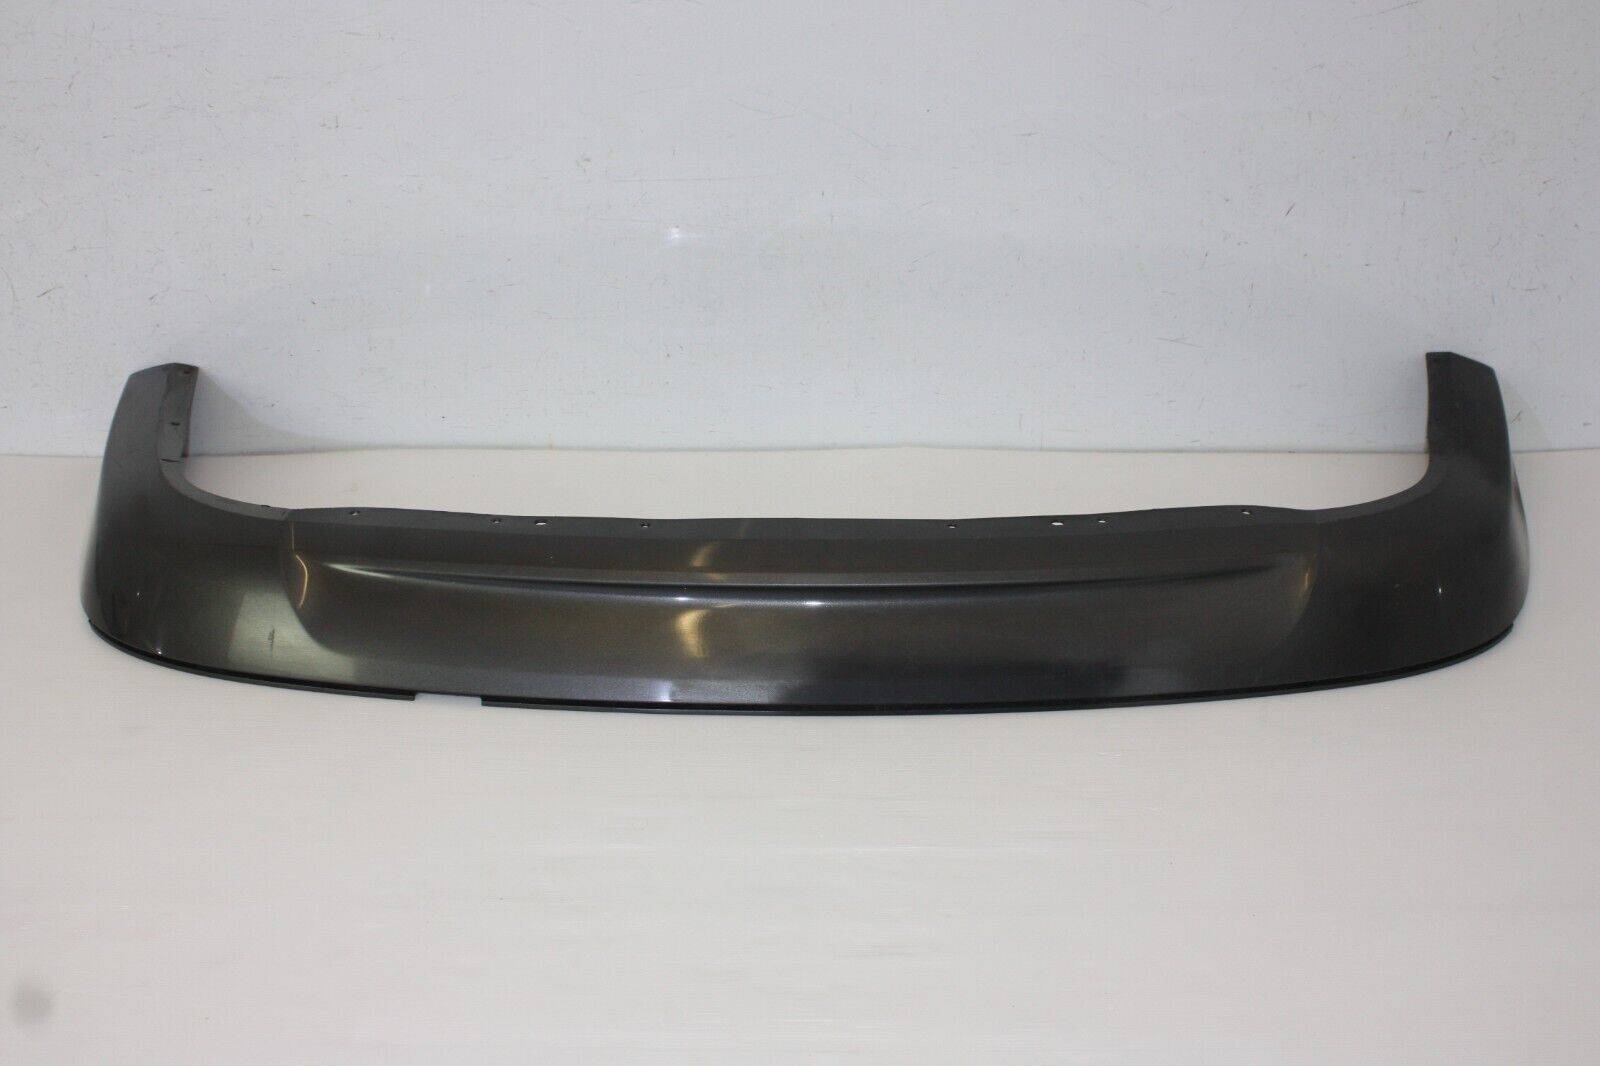 Ford Mondeo Rear Bumper Lower Section 2015 TO 2019 DS73 17A894 L Genuine 175557216999